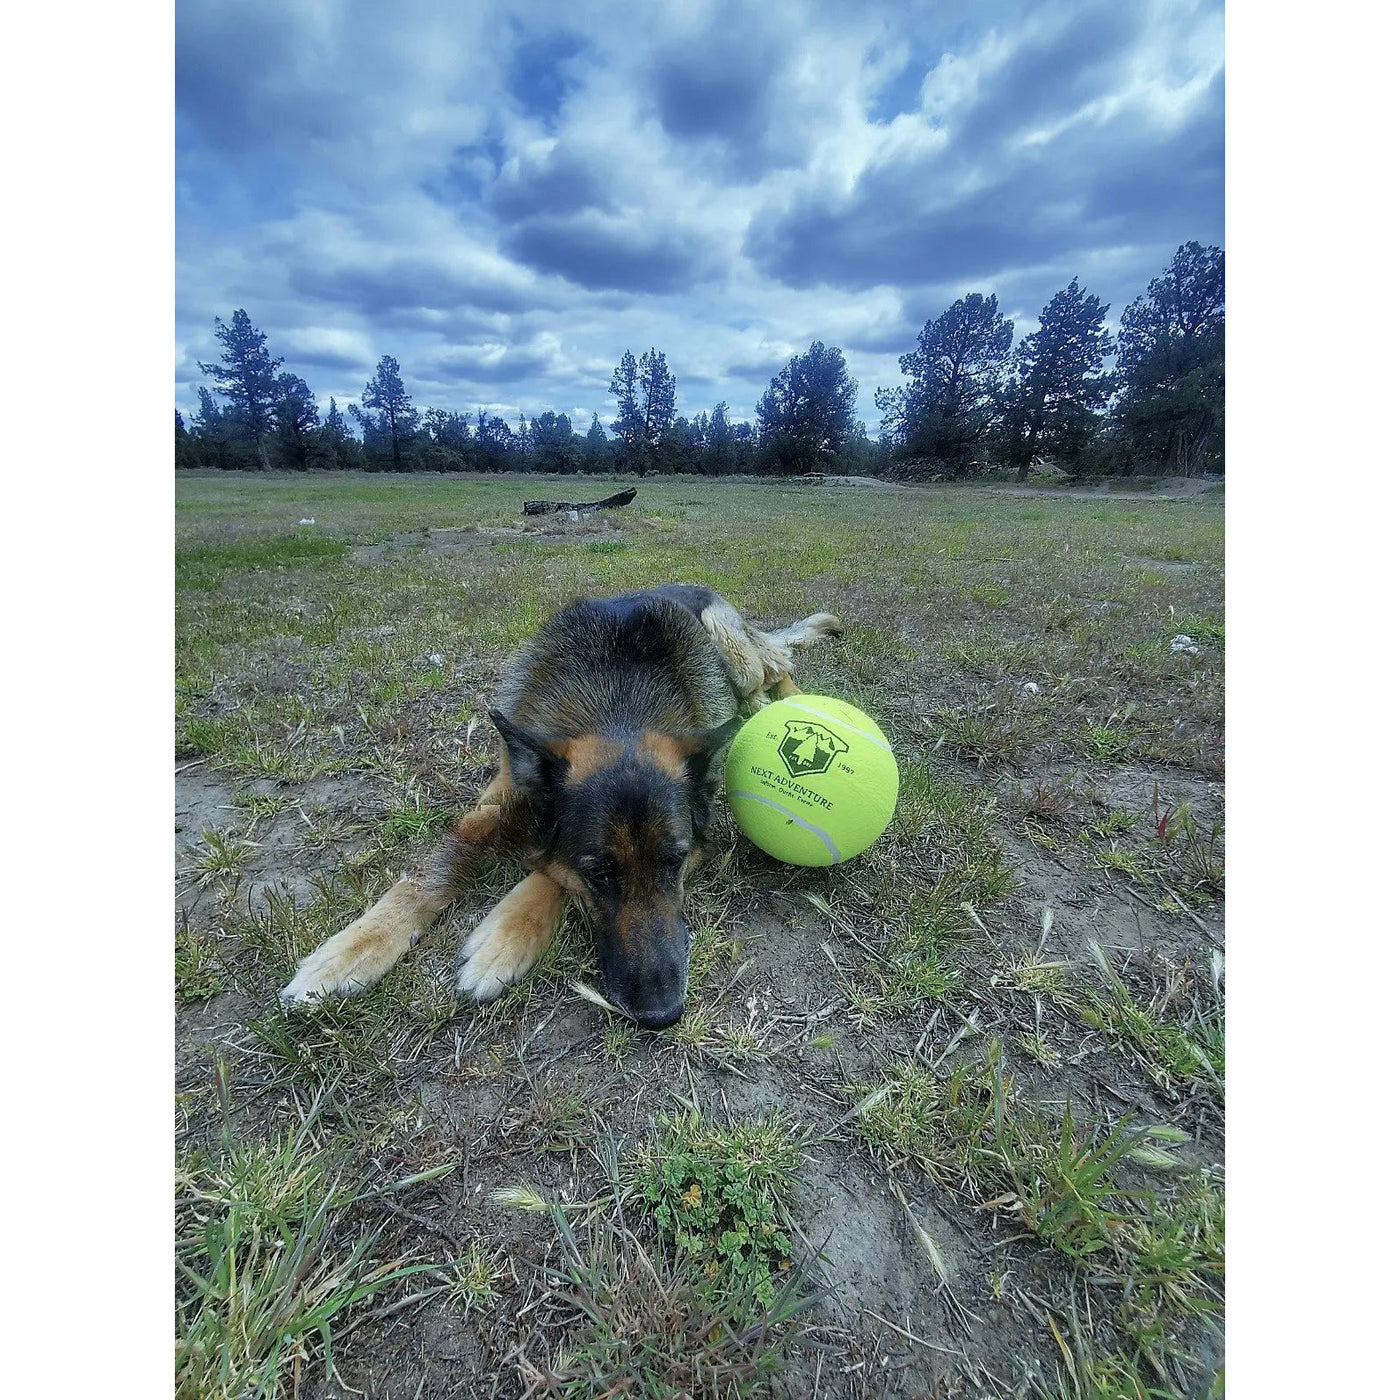 #dog, 8, 9.5, adventure, ball, balllarge, balls, best, brand, chewing, crazy, days, dogs, fast, from, Germanshephard, green, hand, happypetssupply, happypetssupplycomlarge, inch, large, love, material, meta, name, next, over, Pet, Pets, pooch, price, puppy, quality, rubber, save, shipping, shippinglarge, supplies, tennis, that, todaylarge, toys, type, will